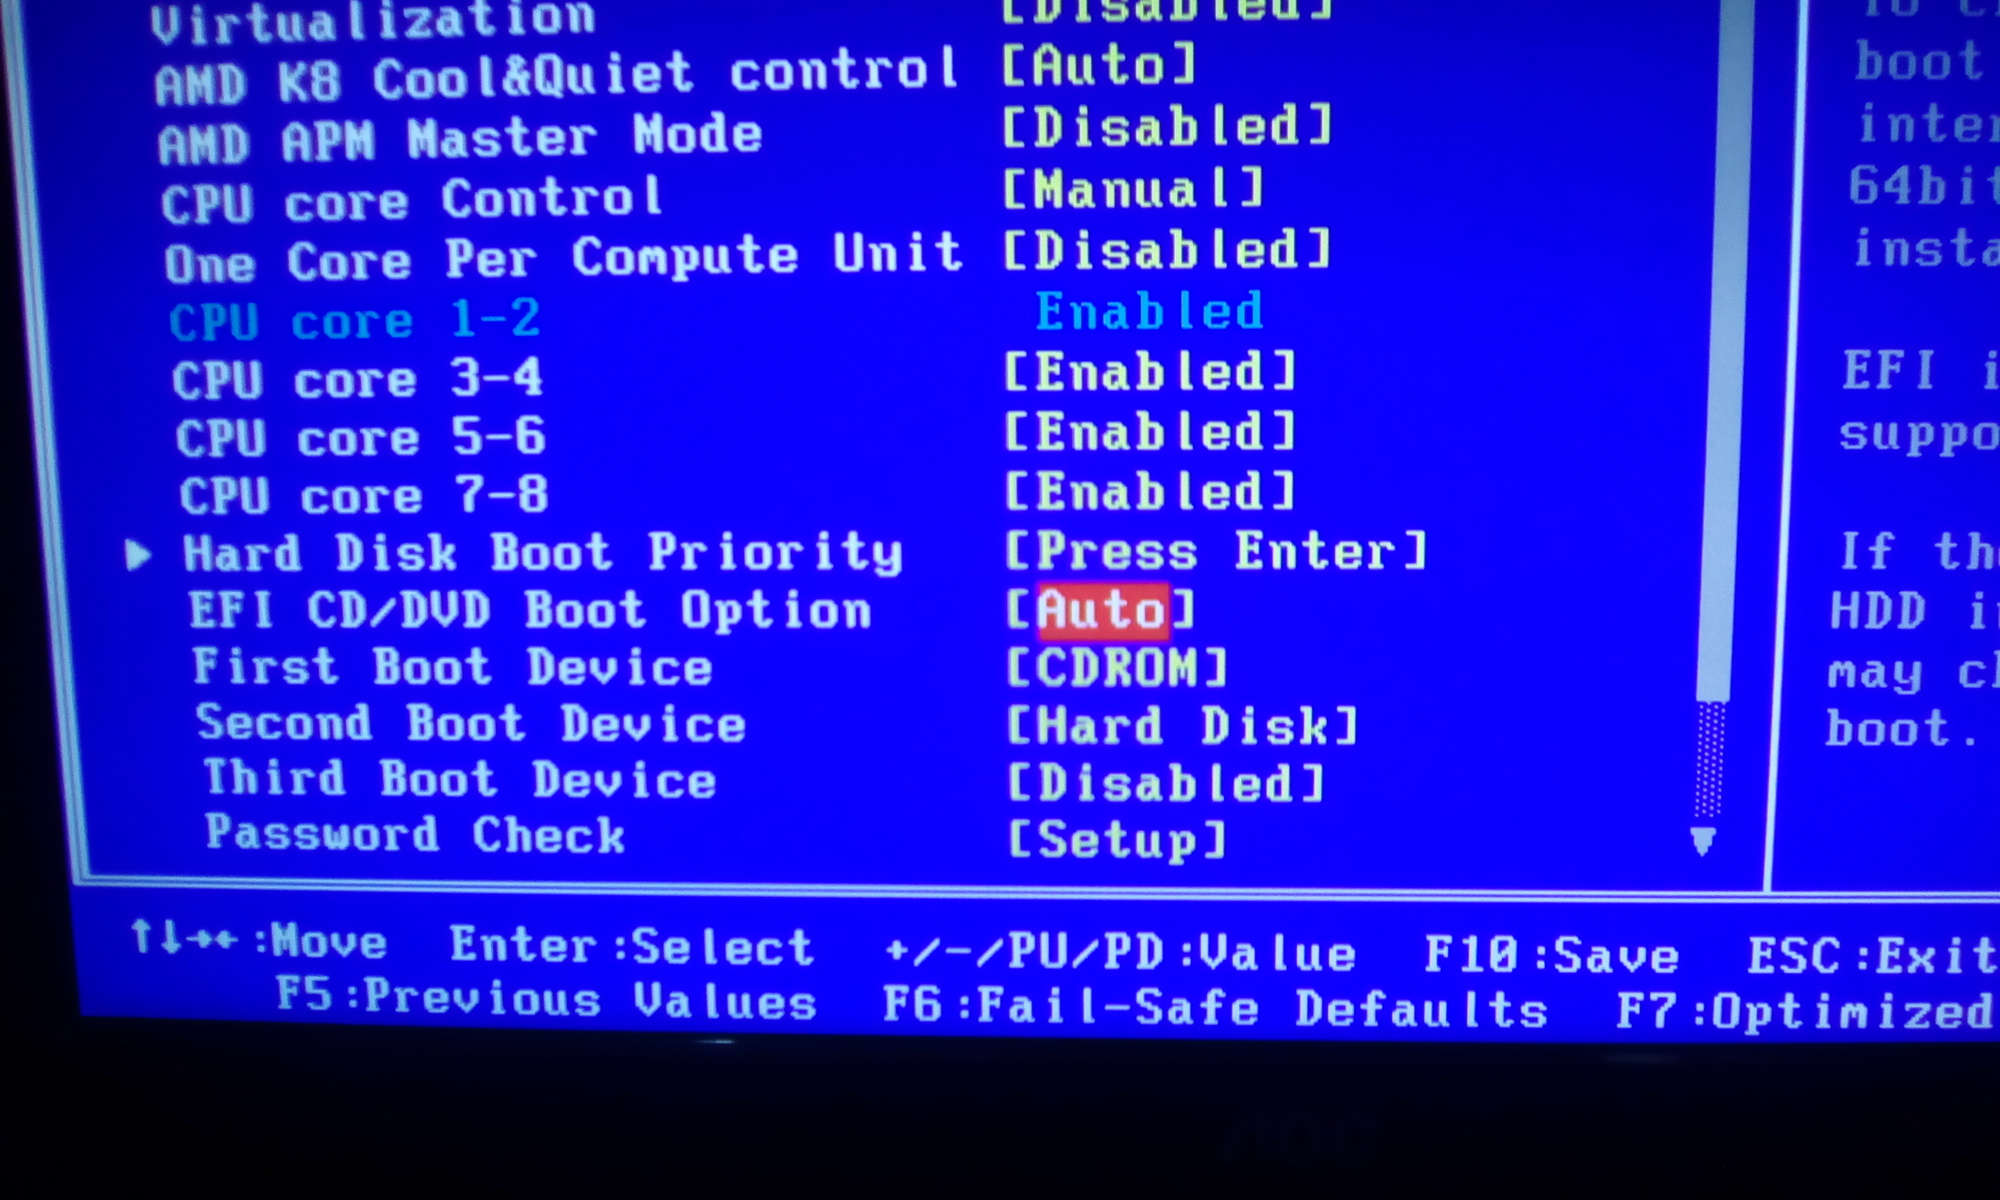 Gigabyte 78lmt usb3 boot option Help please - CPUs, Motherboards, and